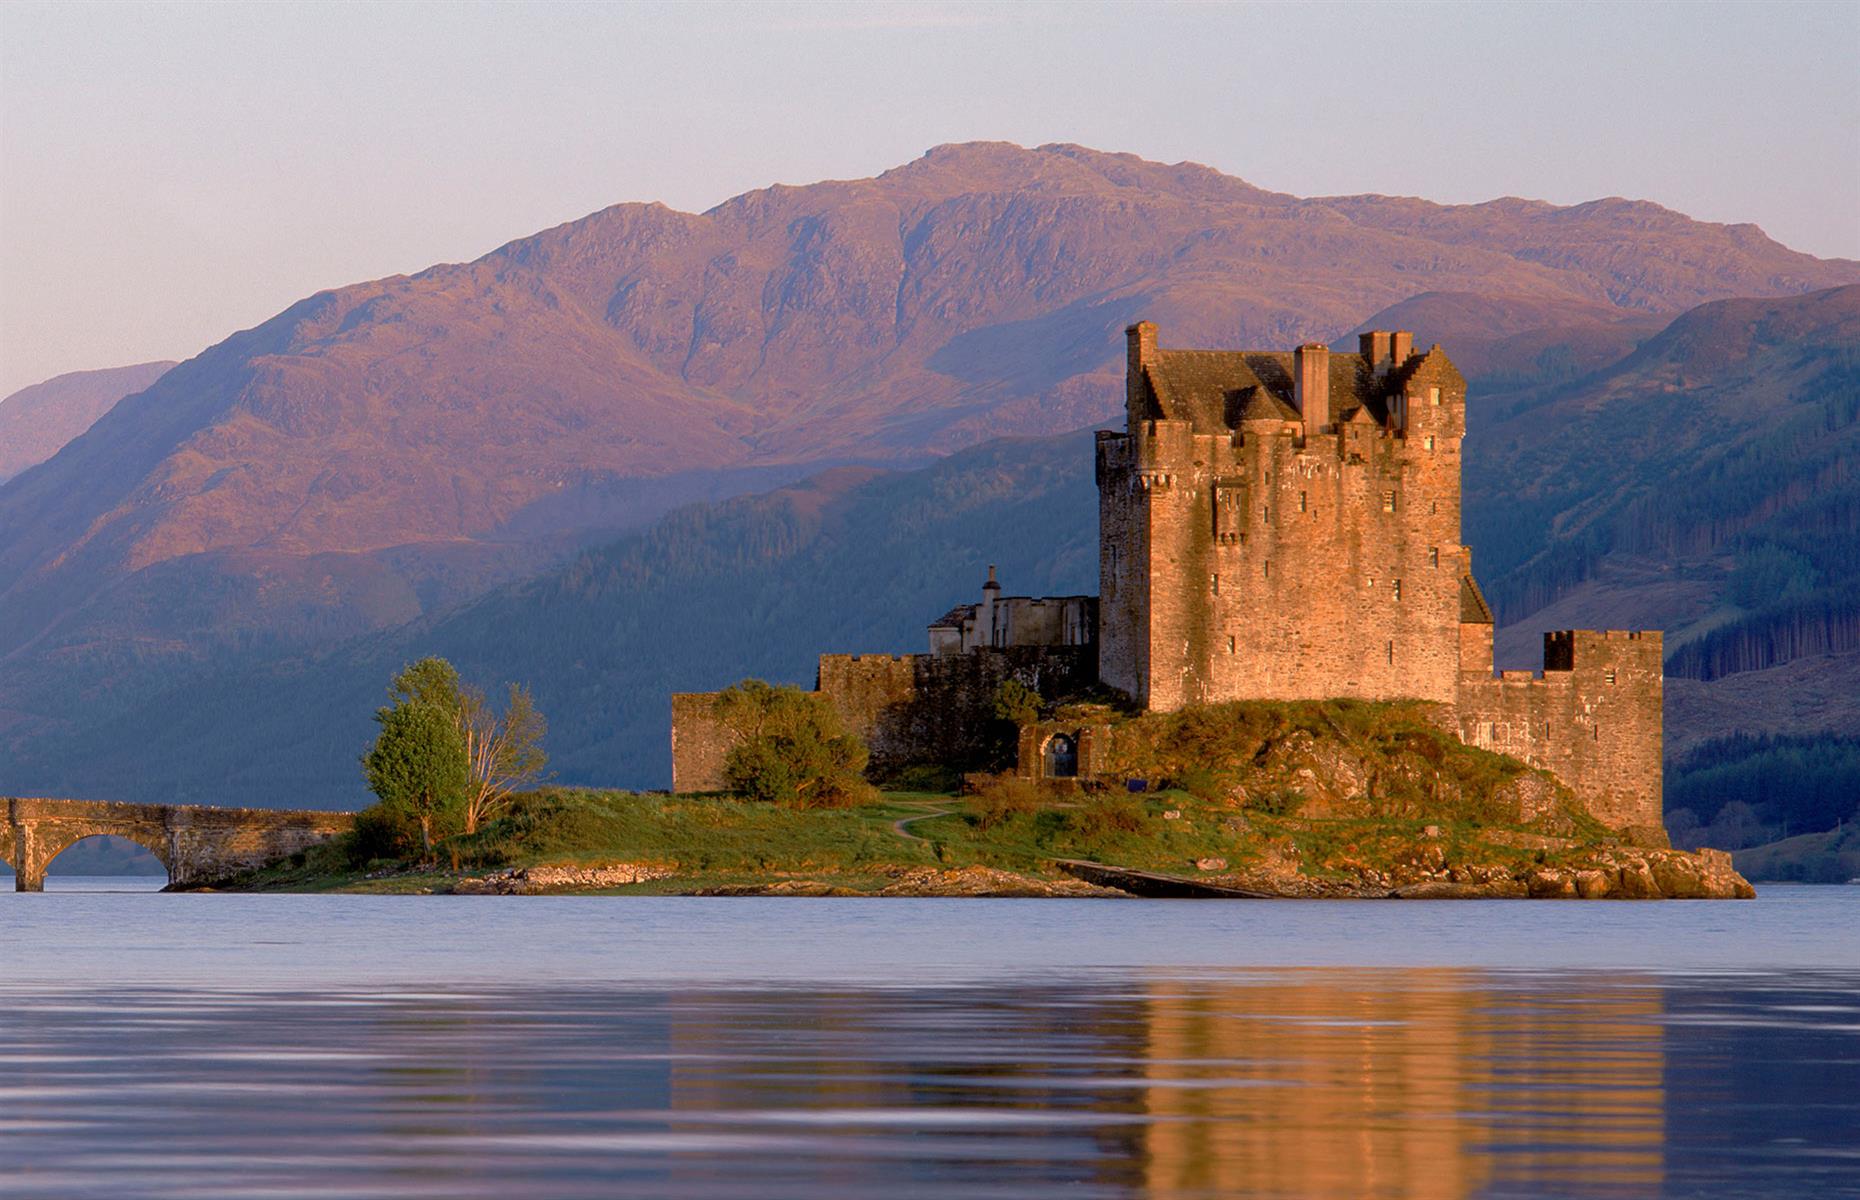 <p>If you are travelling to Skye via the Skye Bridge, the chances are you will pass this <a href="https://www.eileandonancastle.com/">castle</a>, which is one of the most atmospheric in all of Scotland, making it the country's most photographed. The setting helps – sitting at the confluence of three lochs with the hills of Kintail as a backdrop, it's the perfect shortbread-tin view of Scotland, and looks as though it has stood just like this for centuries.</p>